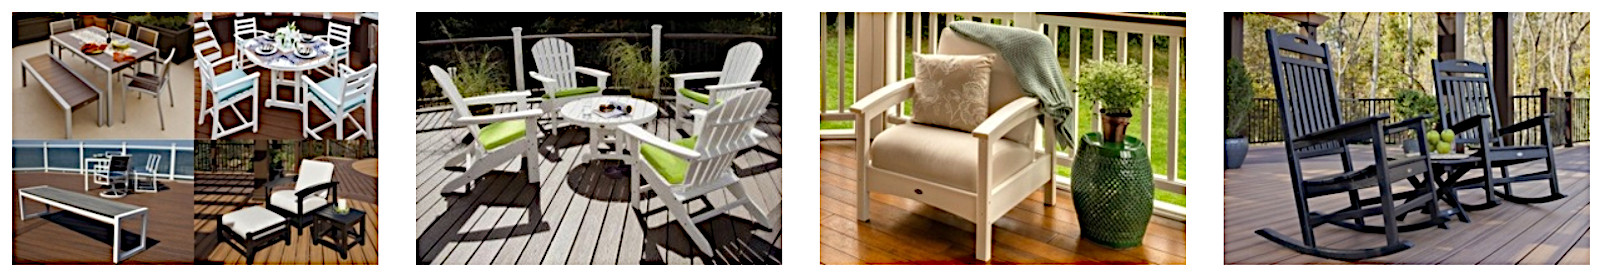 Trex outdoor furniture uncostly